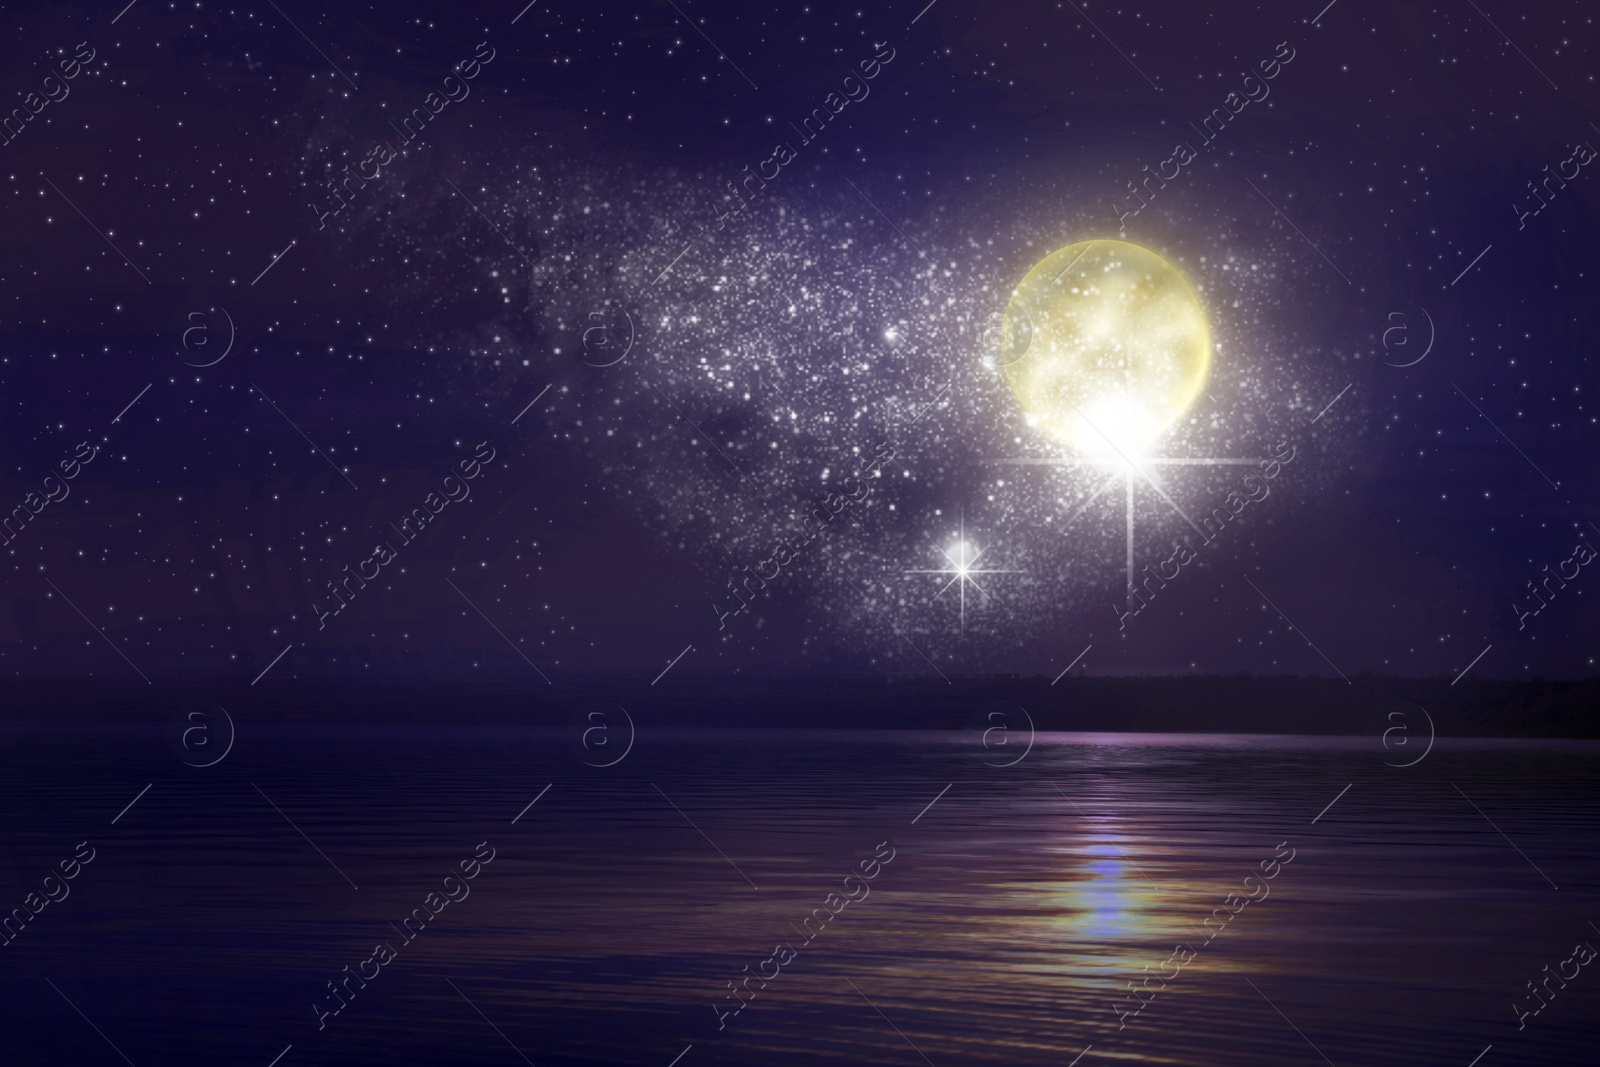 Image of Beautiful full moon in starry sky over sea at night